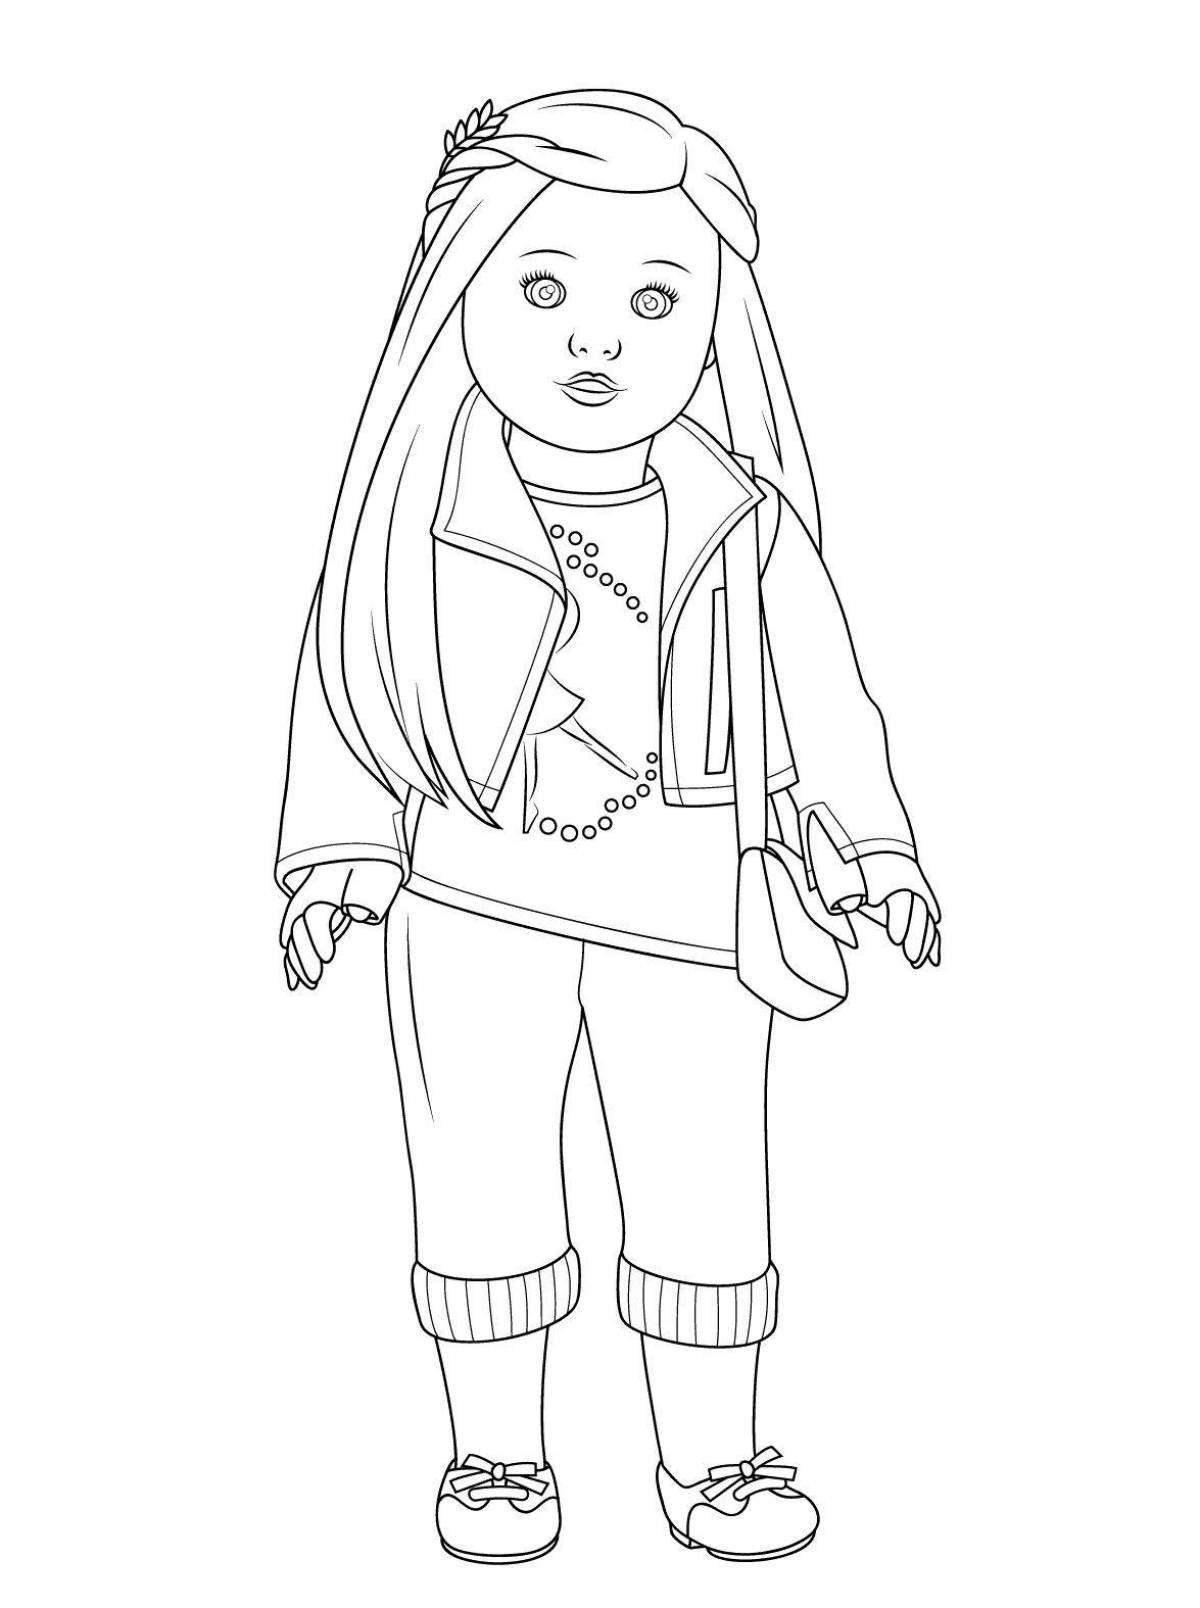 Gorgeous doll coloring page